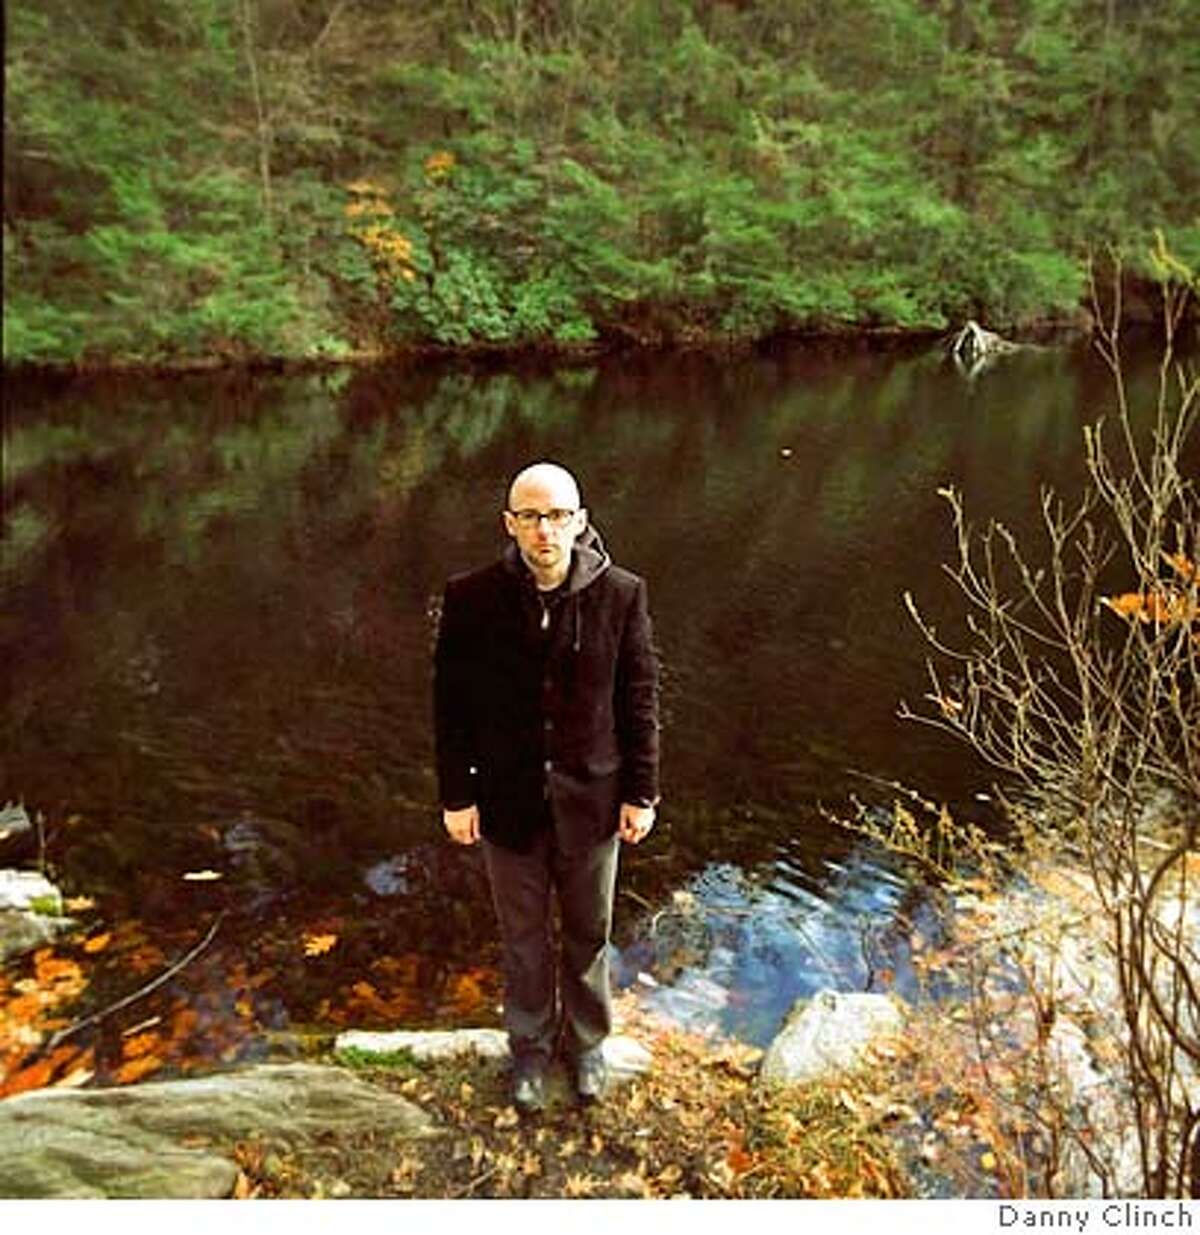 Moby. Photo by Danny Clinch